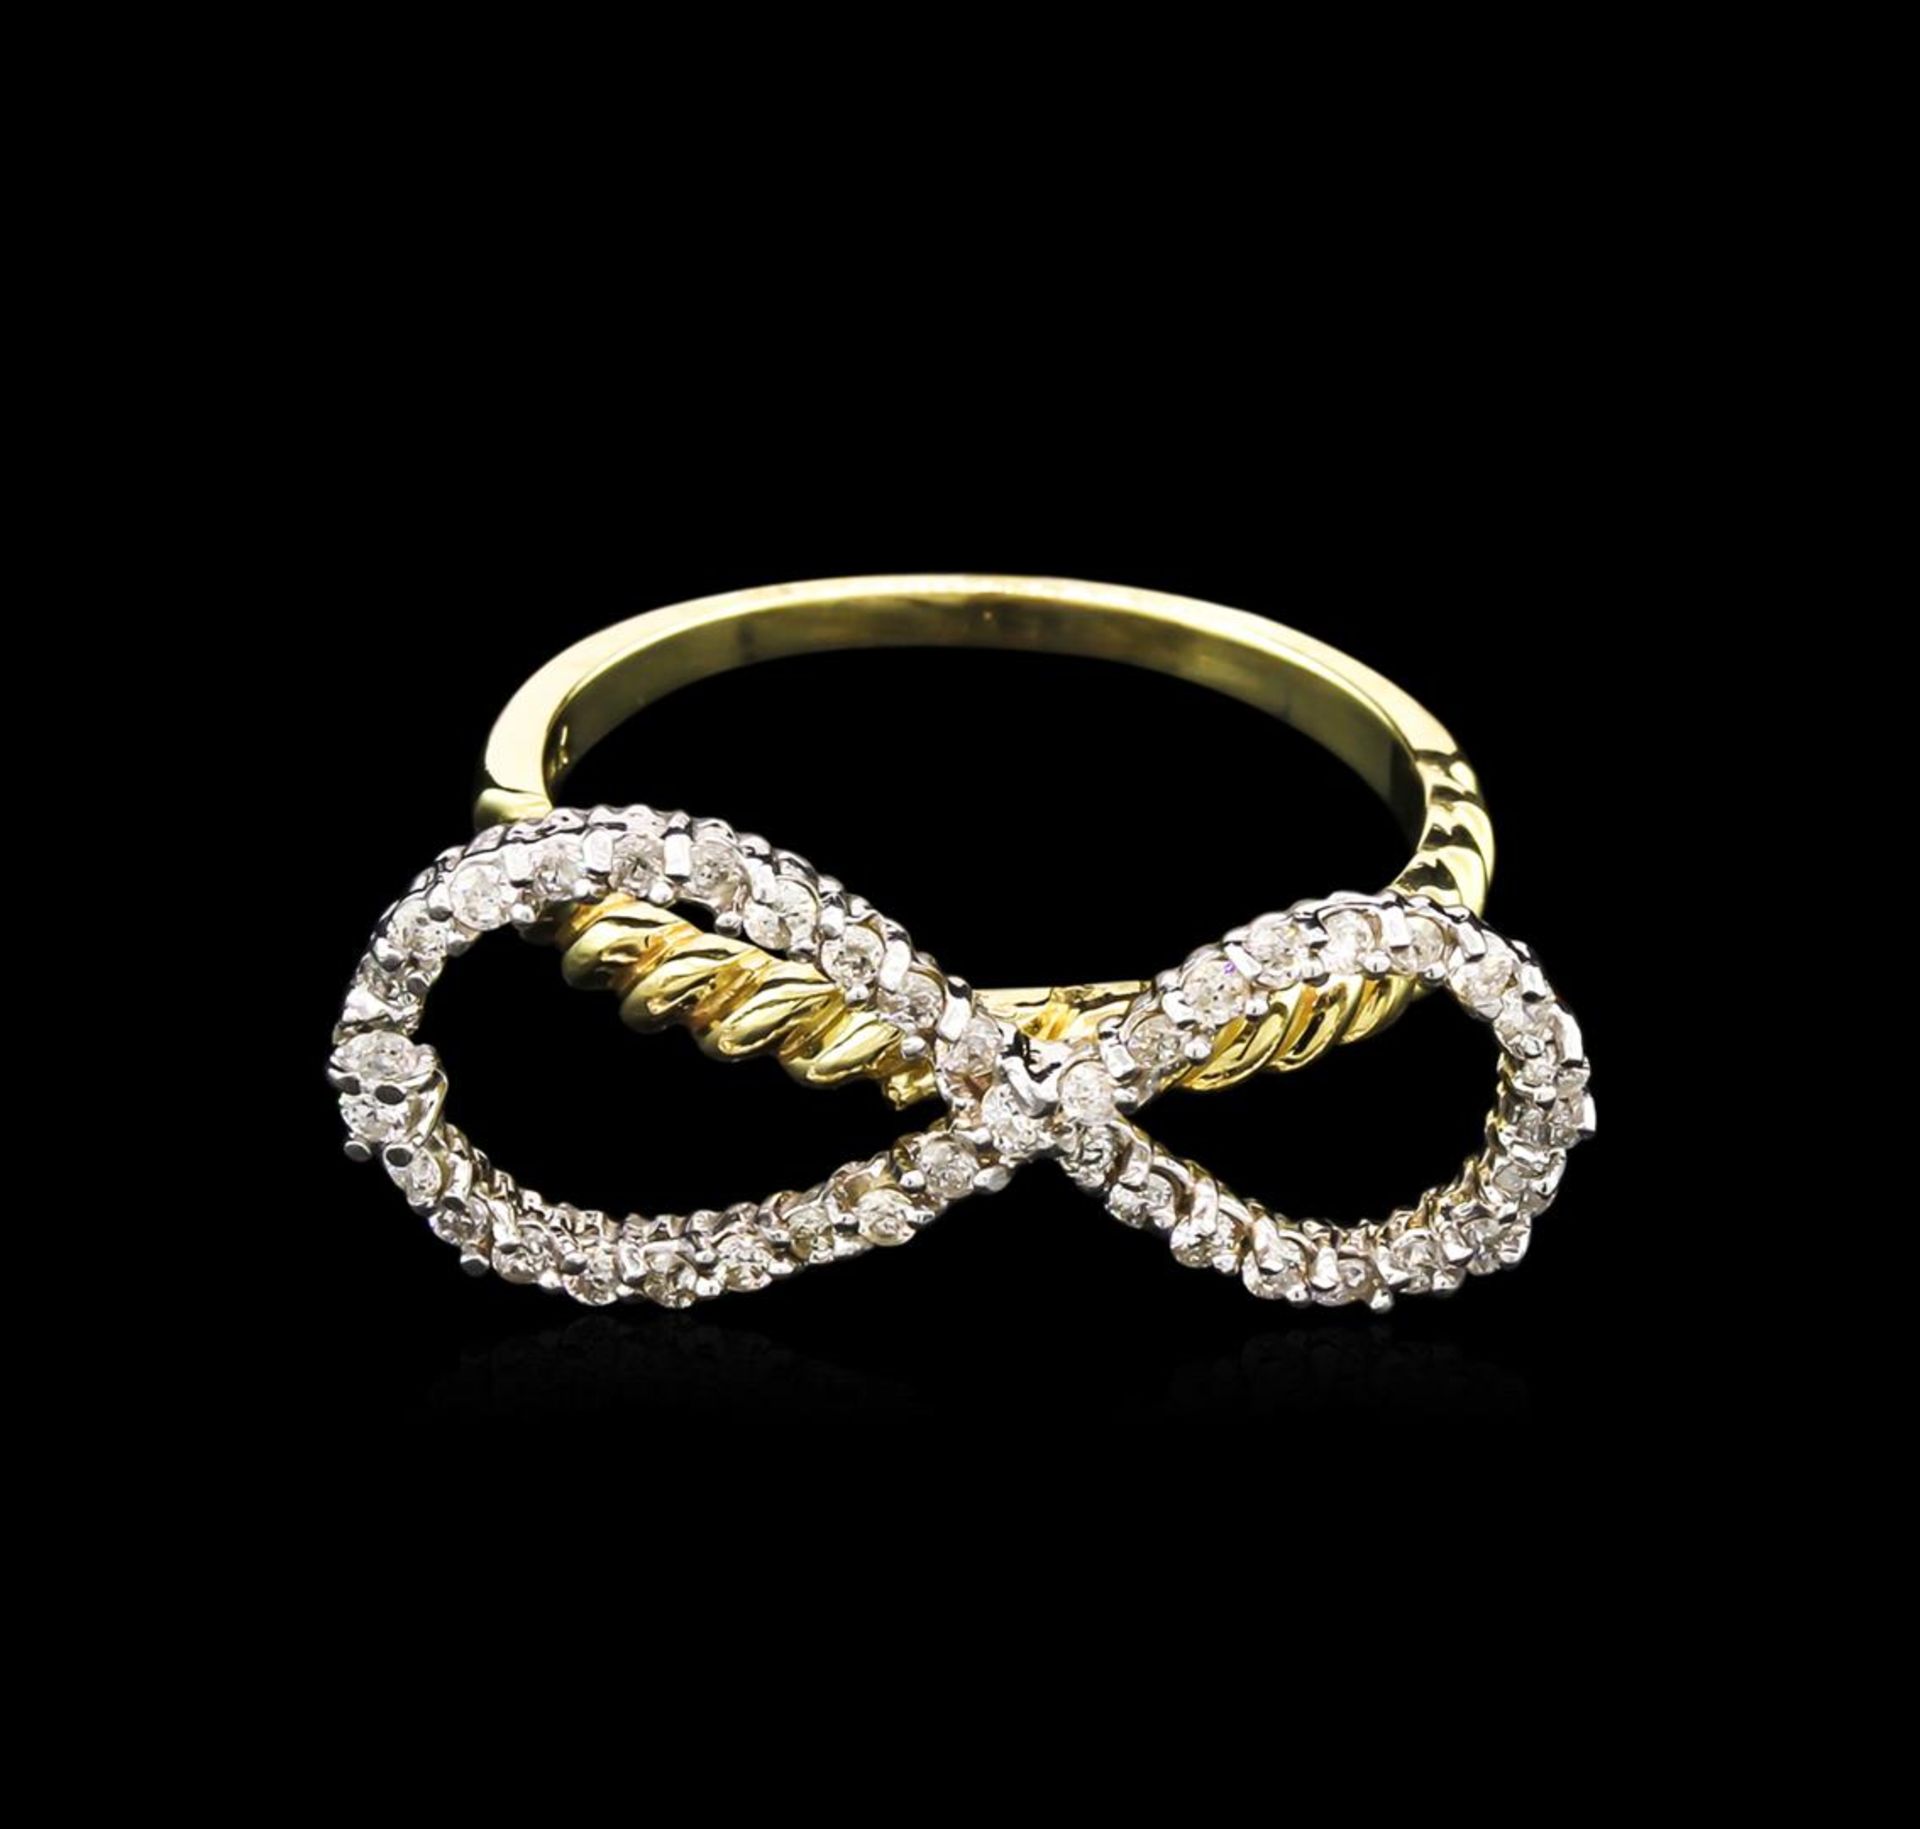 0.35 ctw Diamond Ring - 14KT Two-Tone Gold - Image 2 of 2